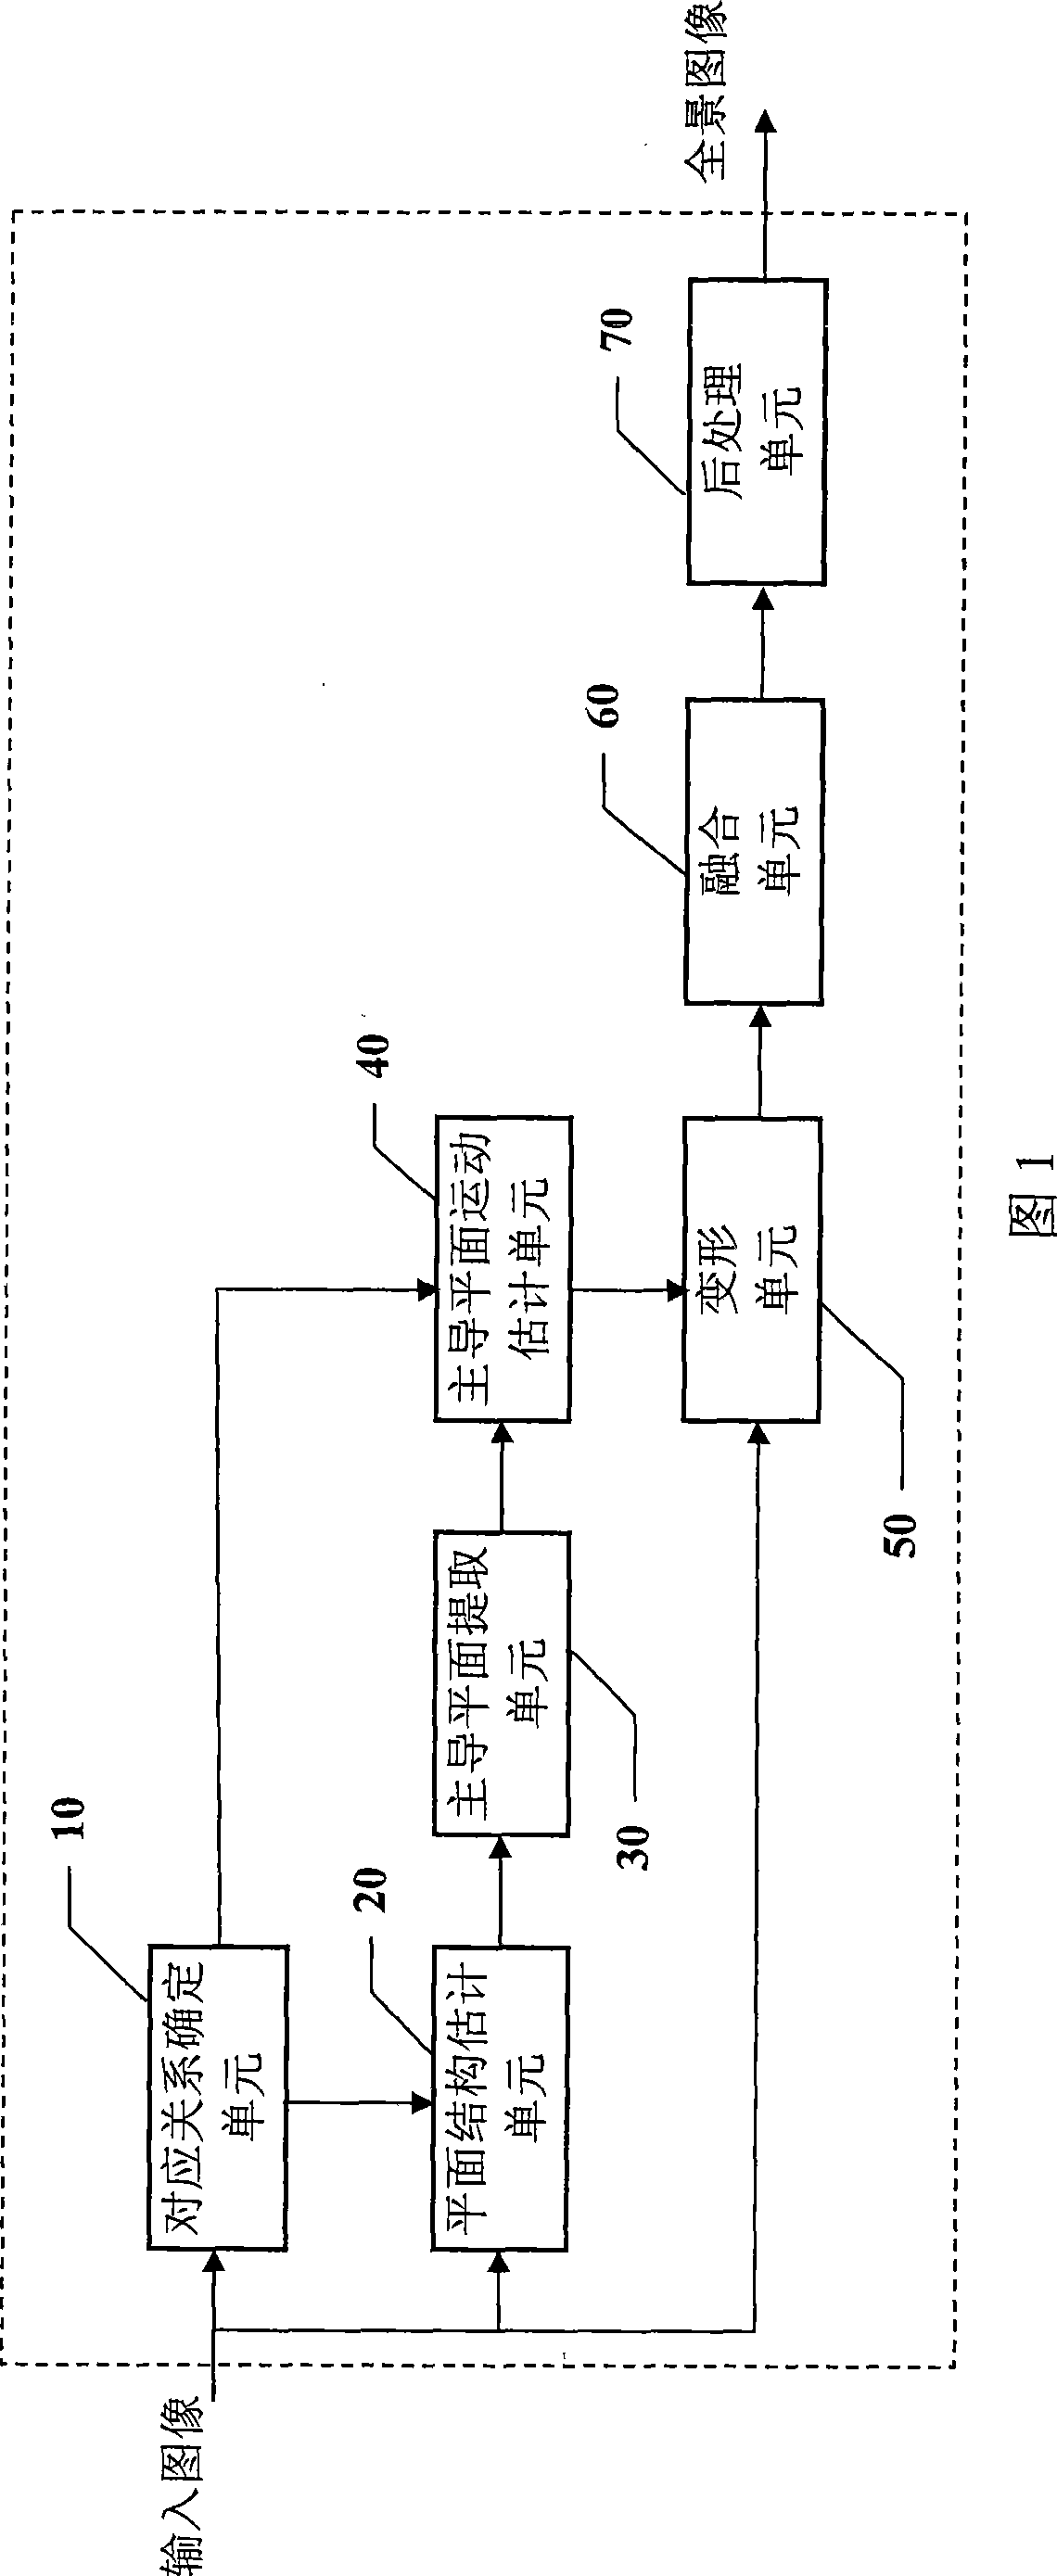 Apparatus and method for generating panorama image